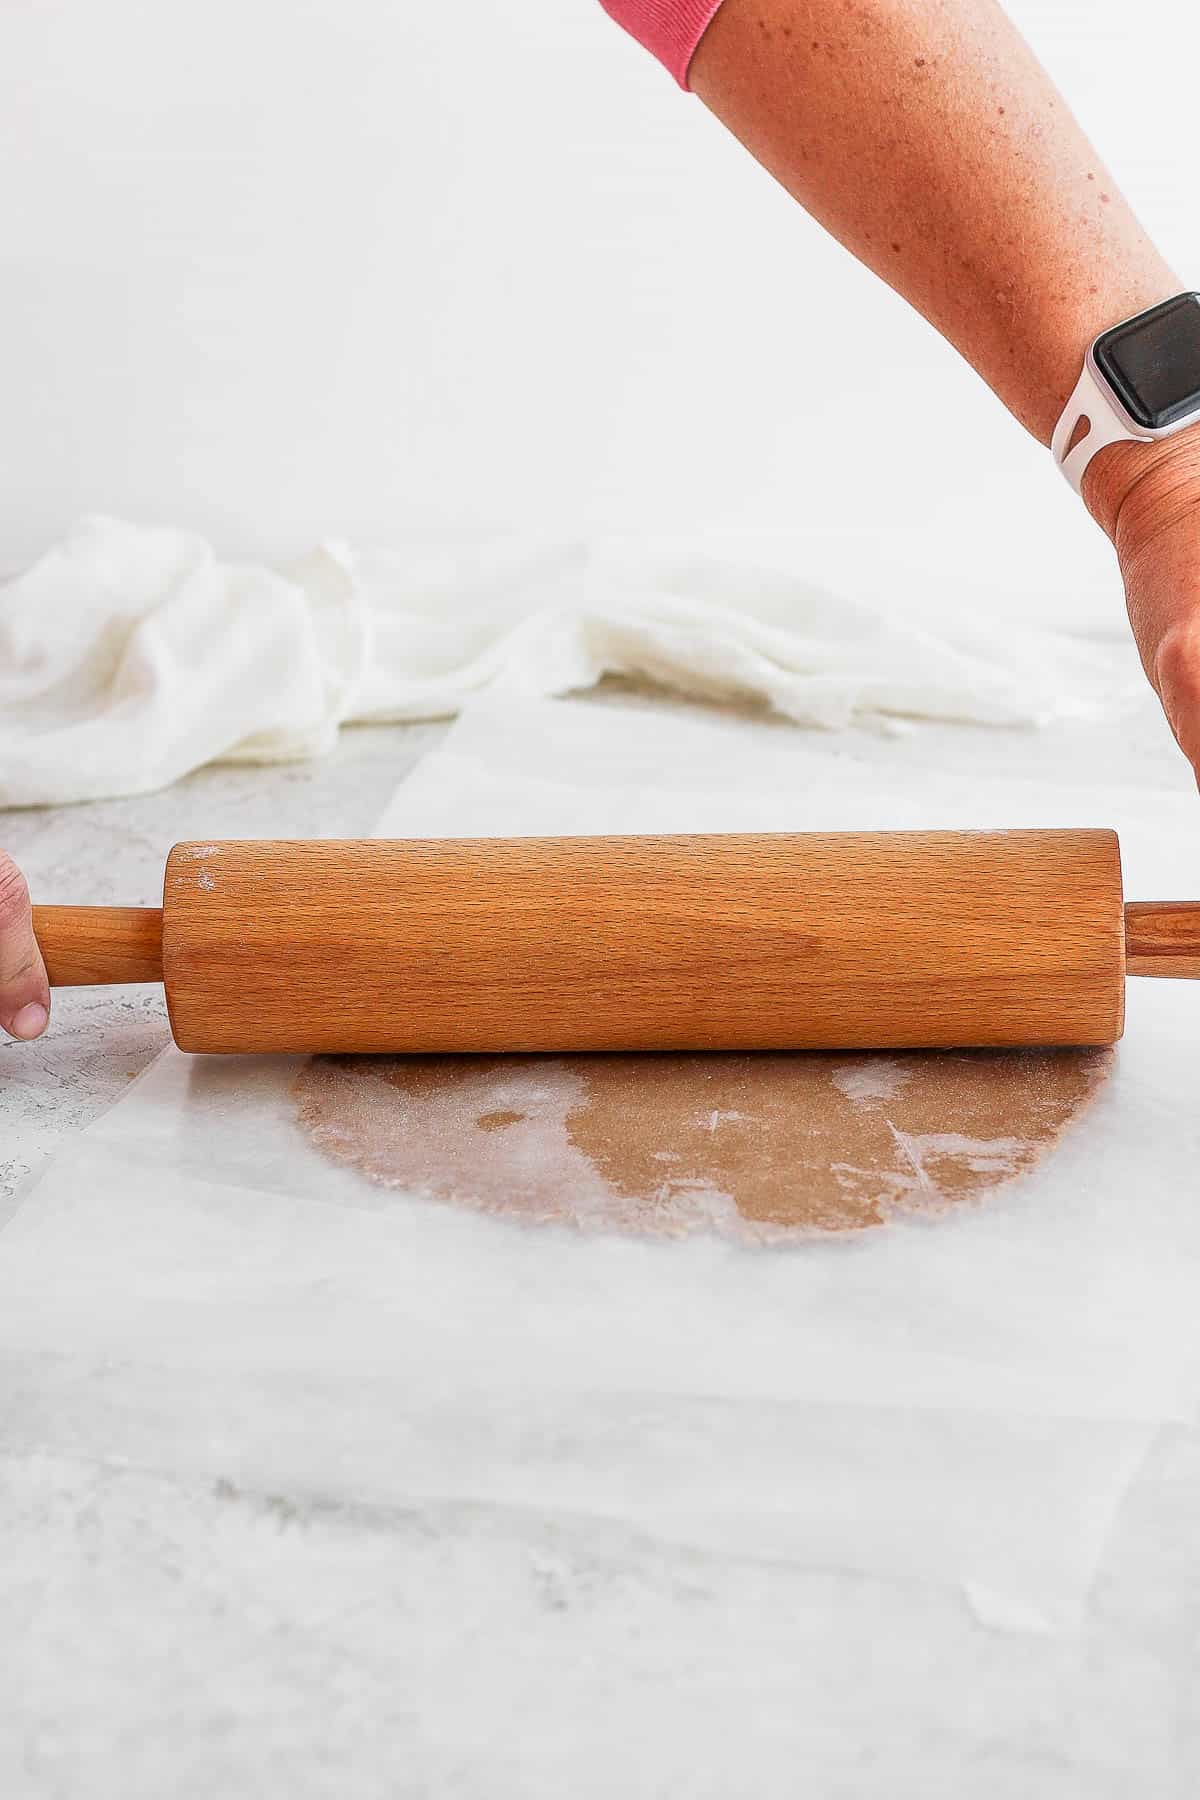 Gluten free sugar cookie dough being rolled out with a rolling pin.